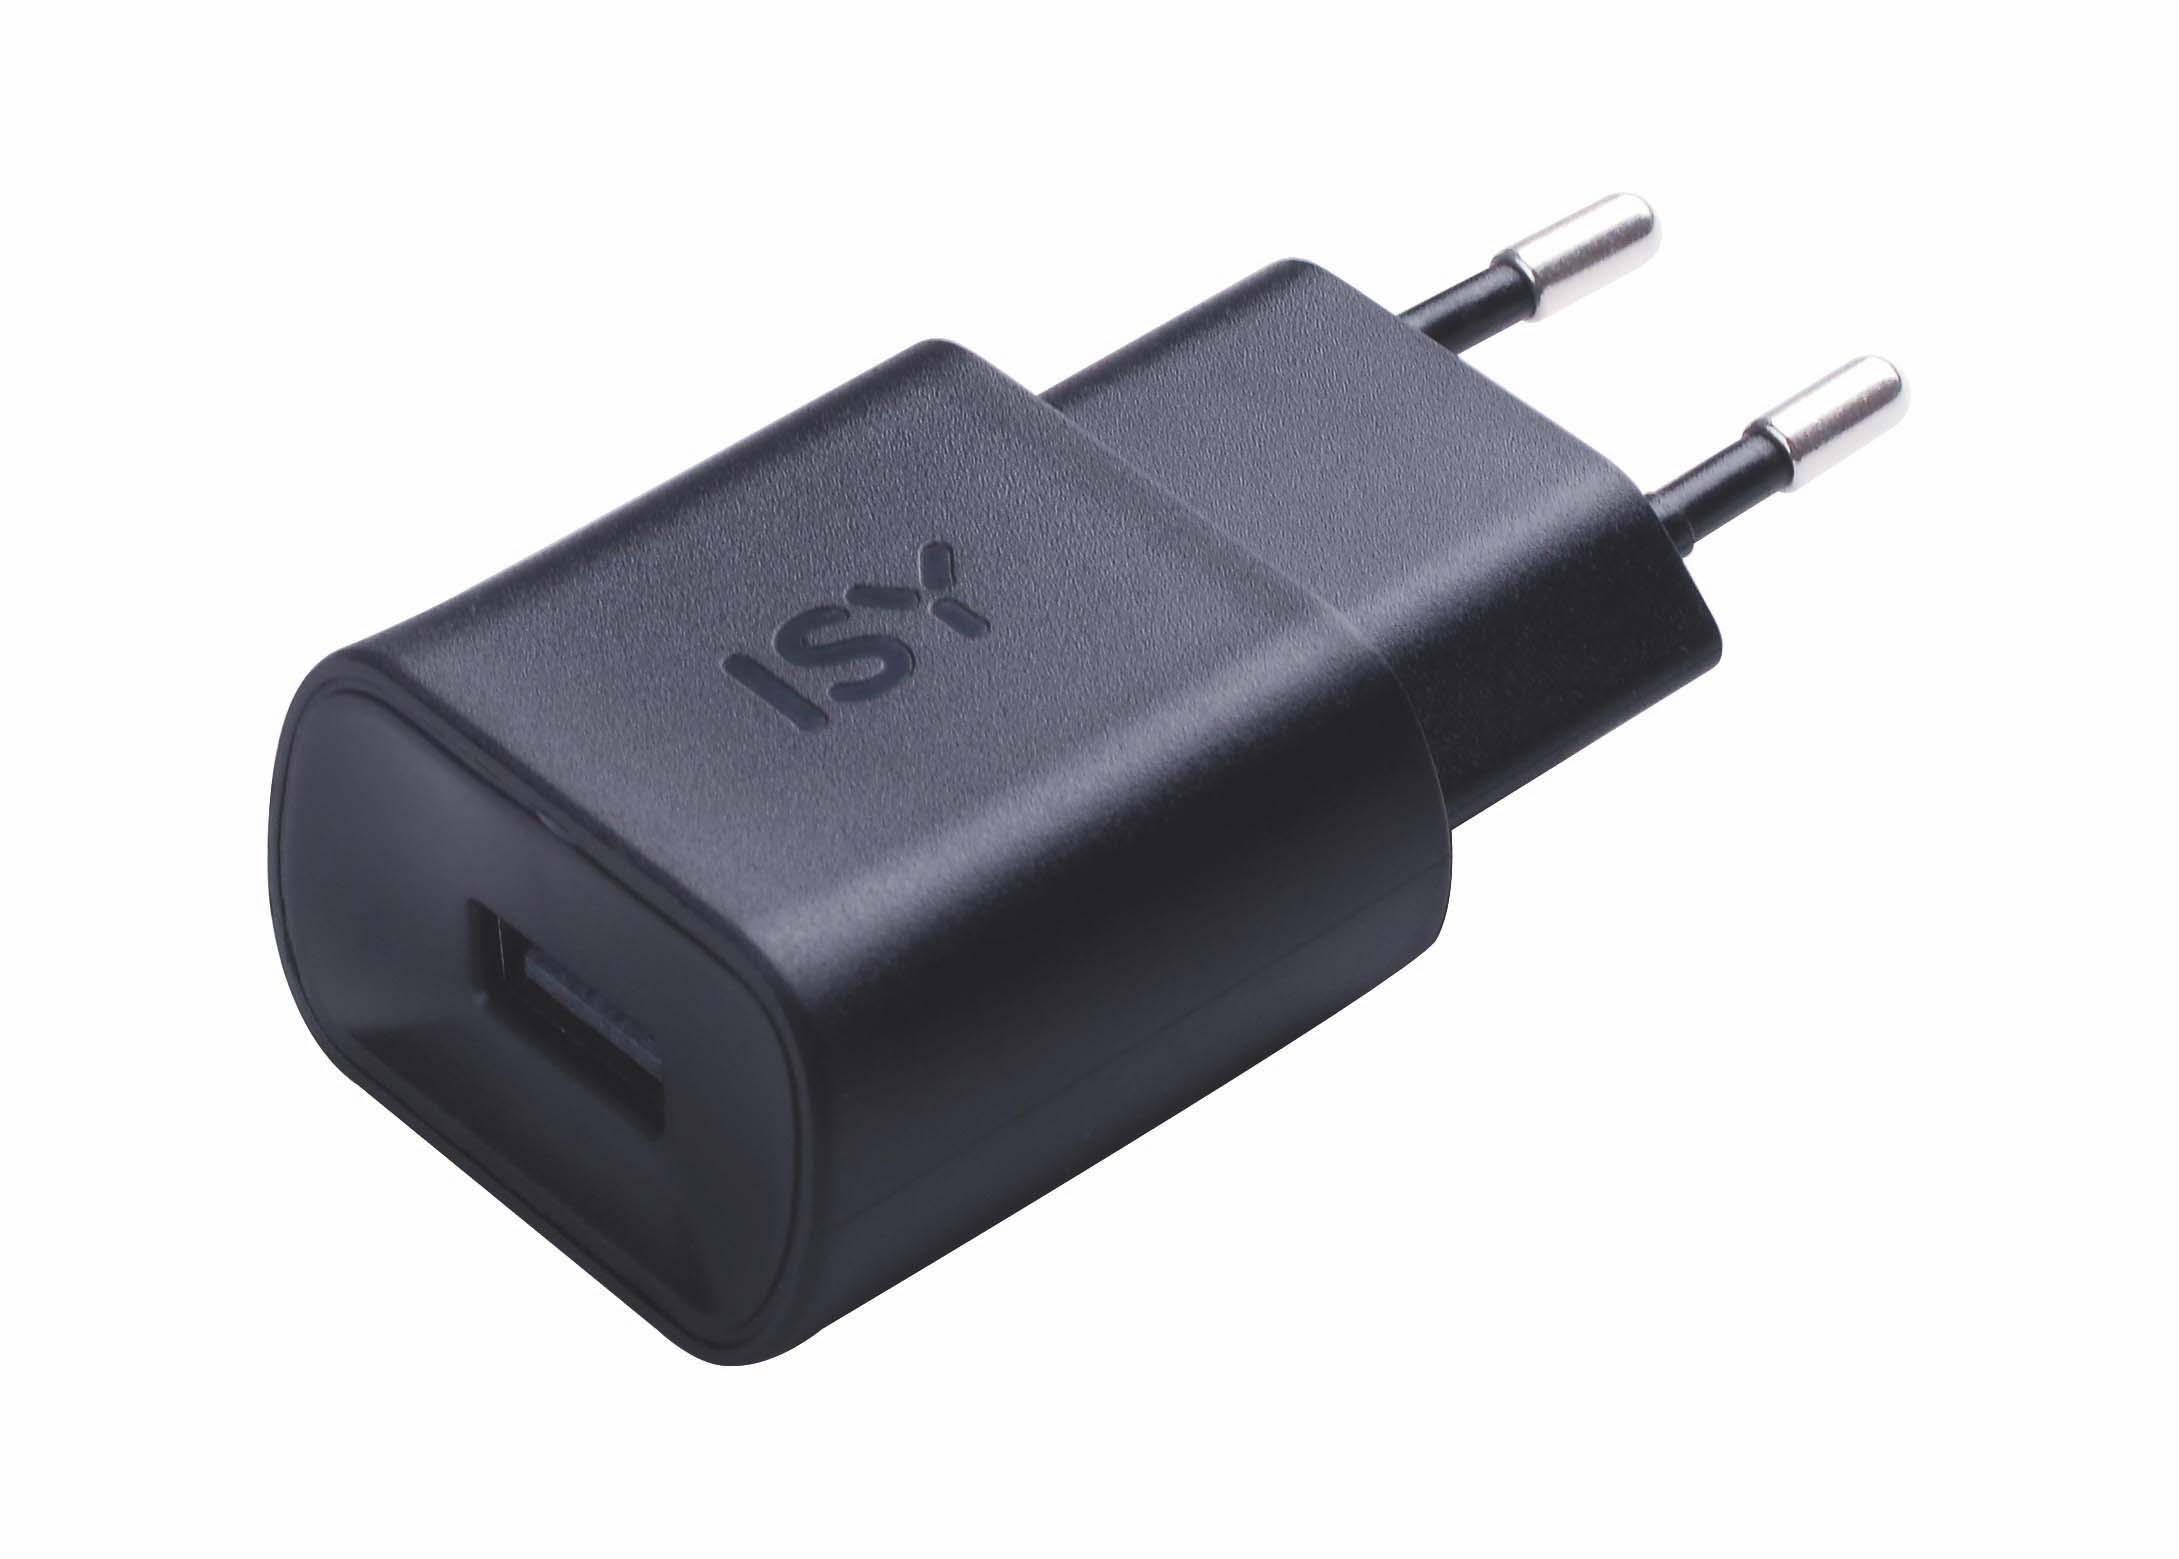 1.2 Charger USB USB A ISY Wall Charger Wall